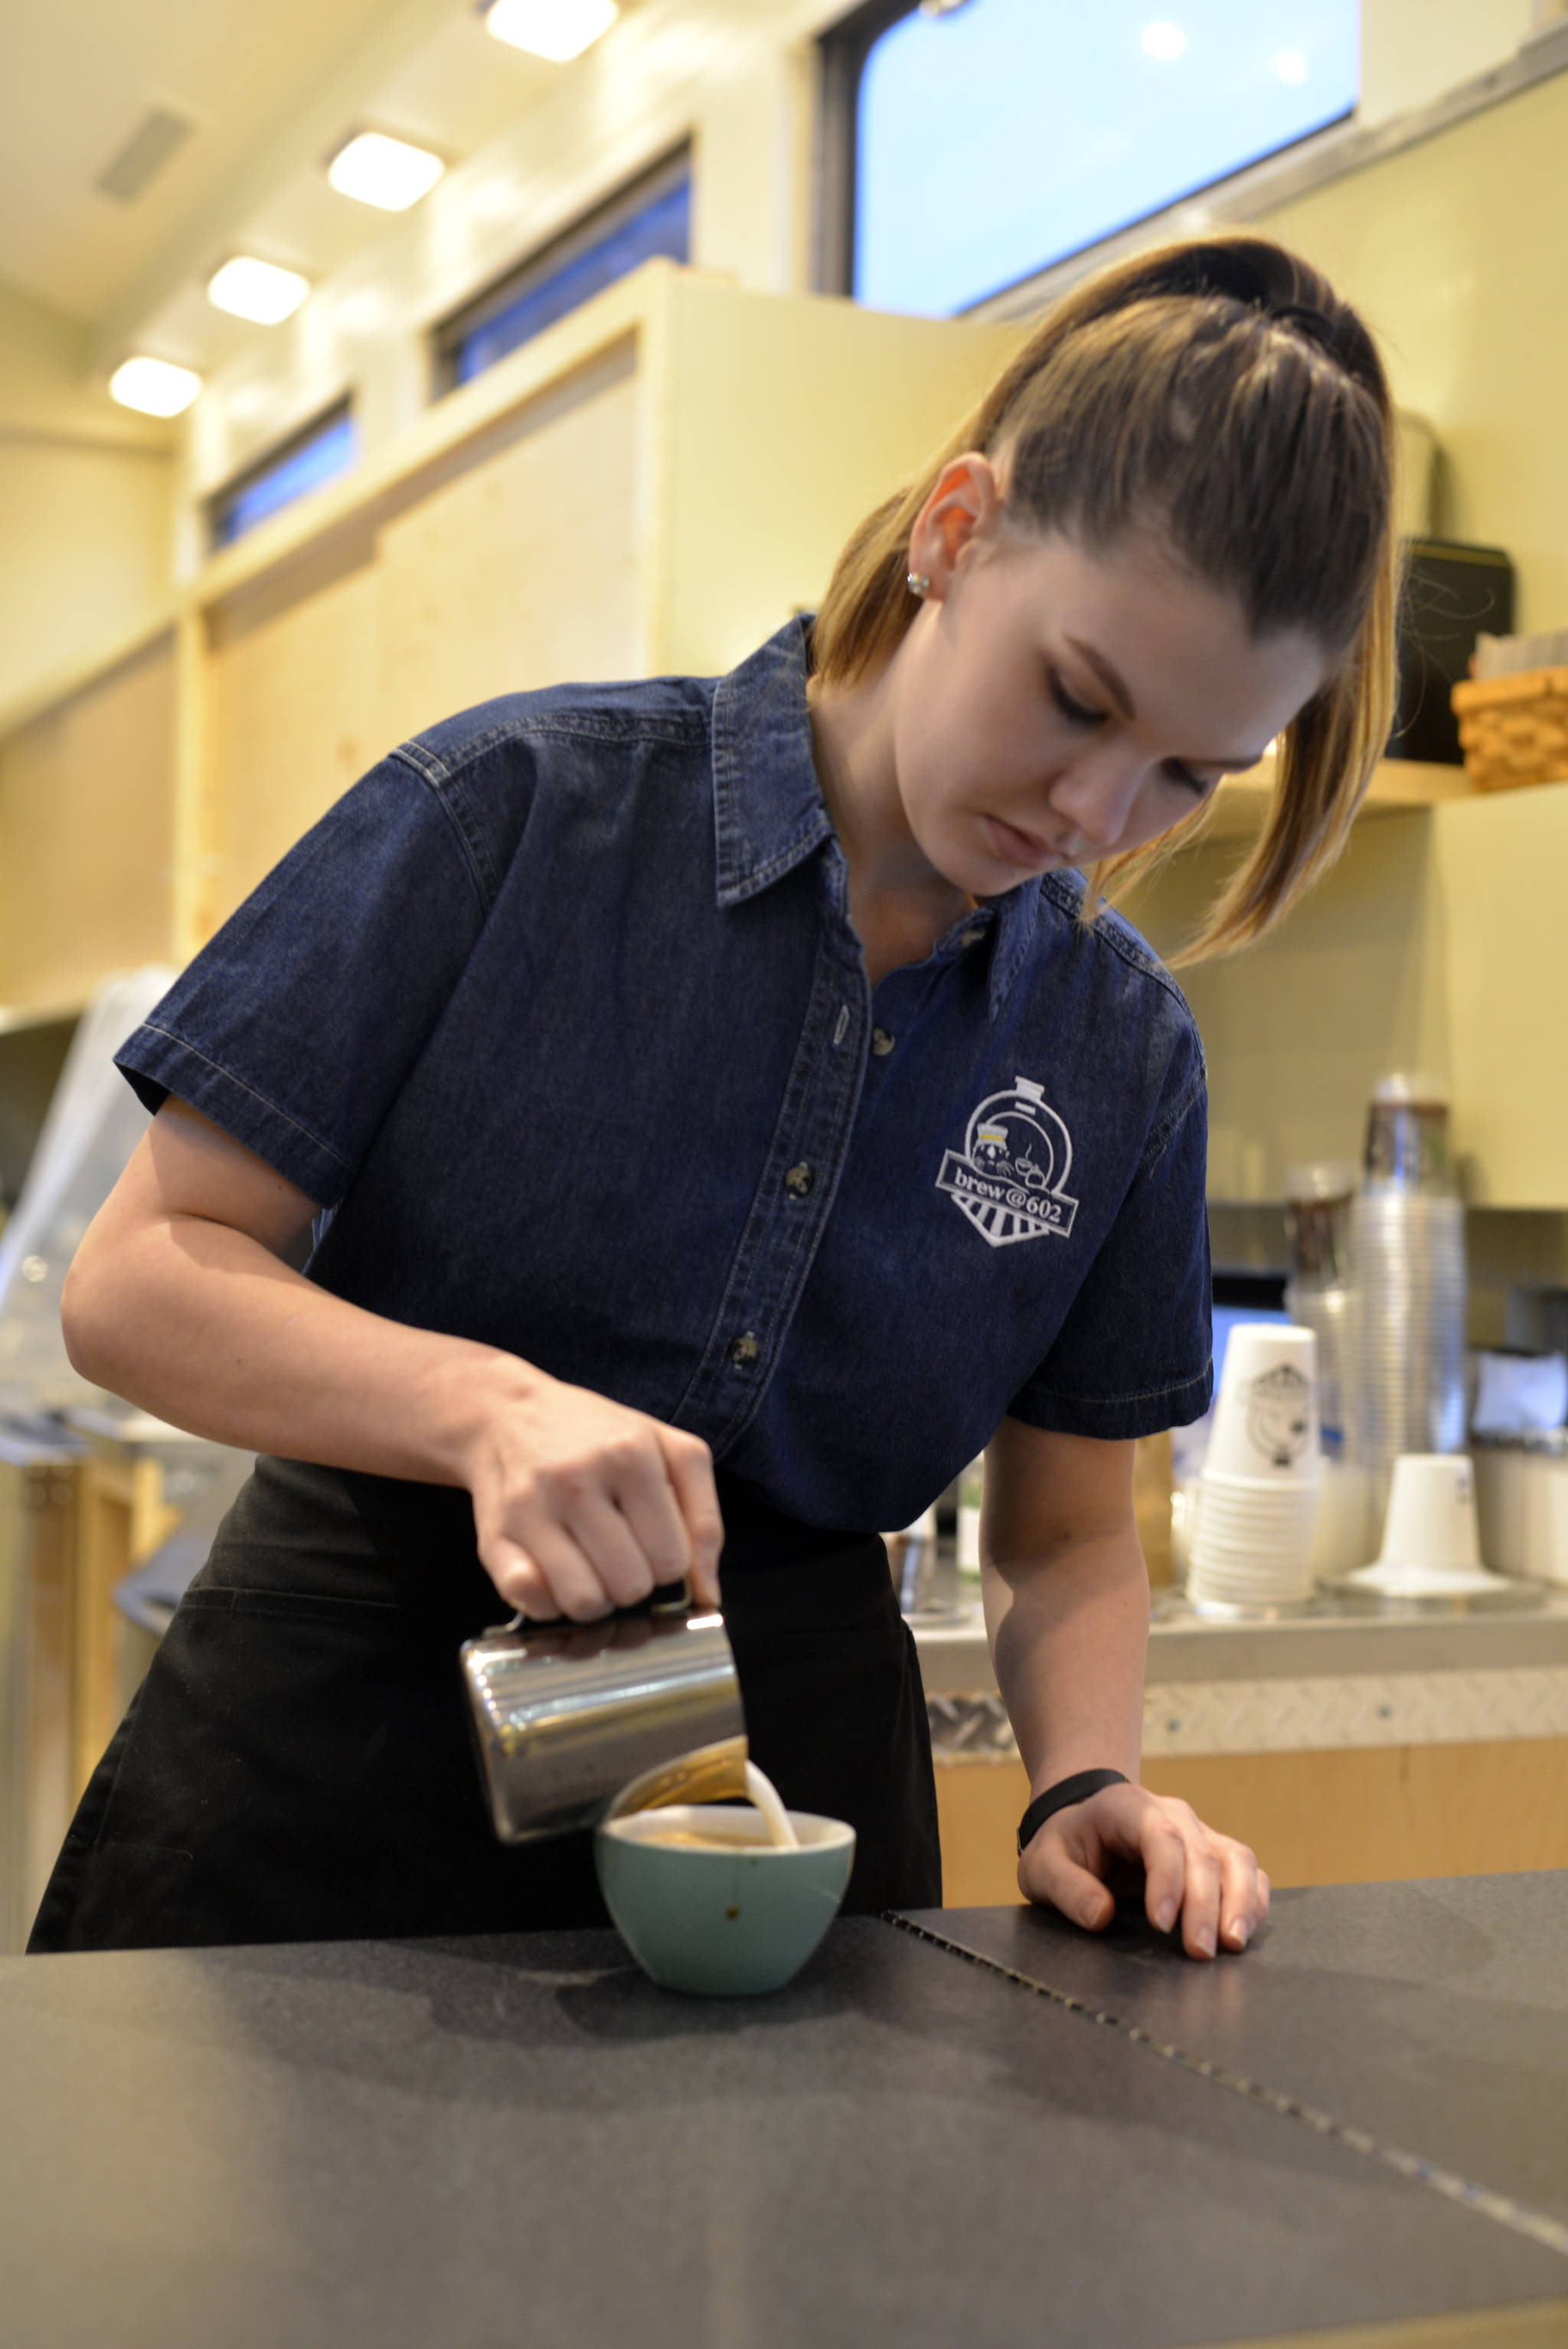 Alyeska Krull puts the finishing touches on a coffee drink during the final days of training before the grand opening of Brew@602, a coffee and waffle shop located on Kleeb Loop Road. The shop will be serving Steam Dot coffee from Anchorage. (Photo by Kat Sorensen/Peninsula Clarion)